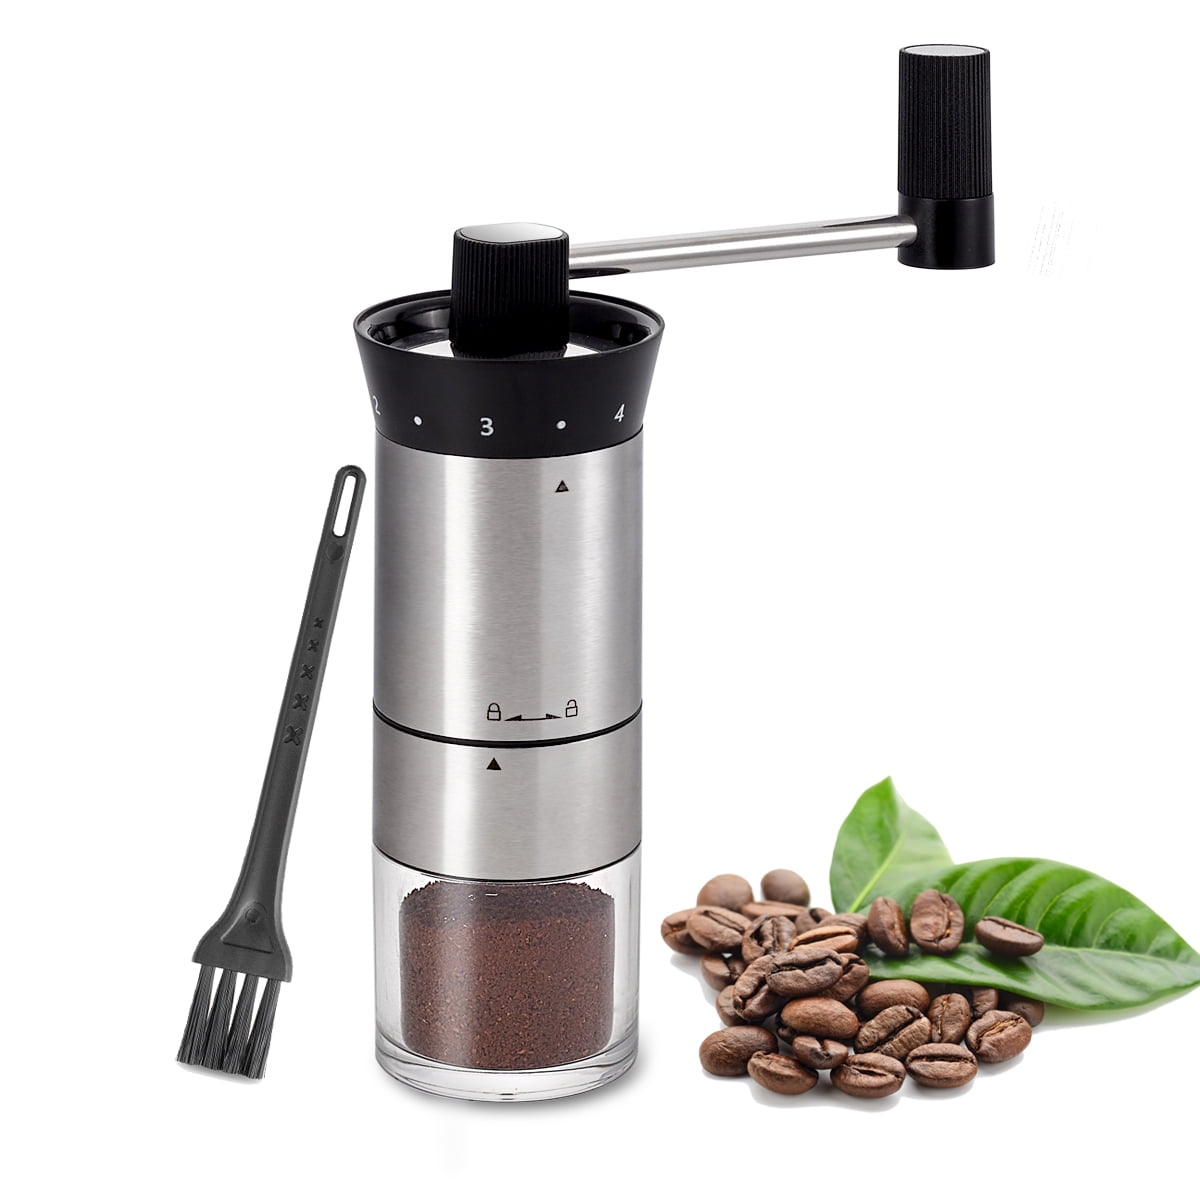 Large Capacity Glass Hand Grinder Coffee Grinder Set Manual Grinder Manual  Coffee Grinder Food Grade Plastic Glass Silo - AliExpress